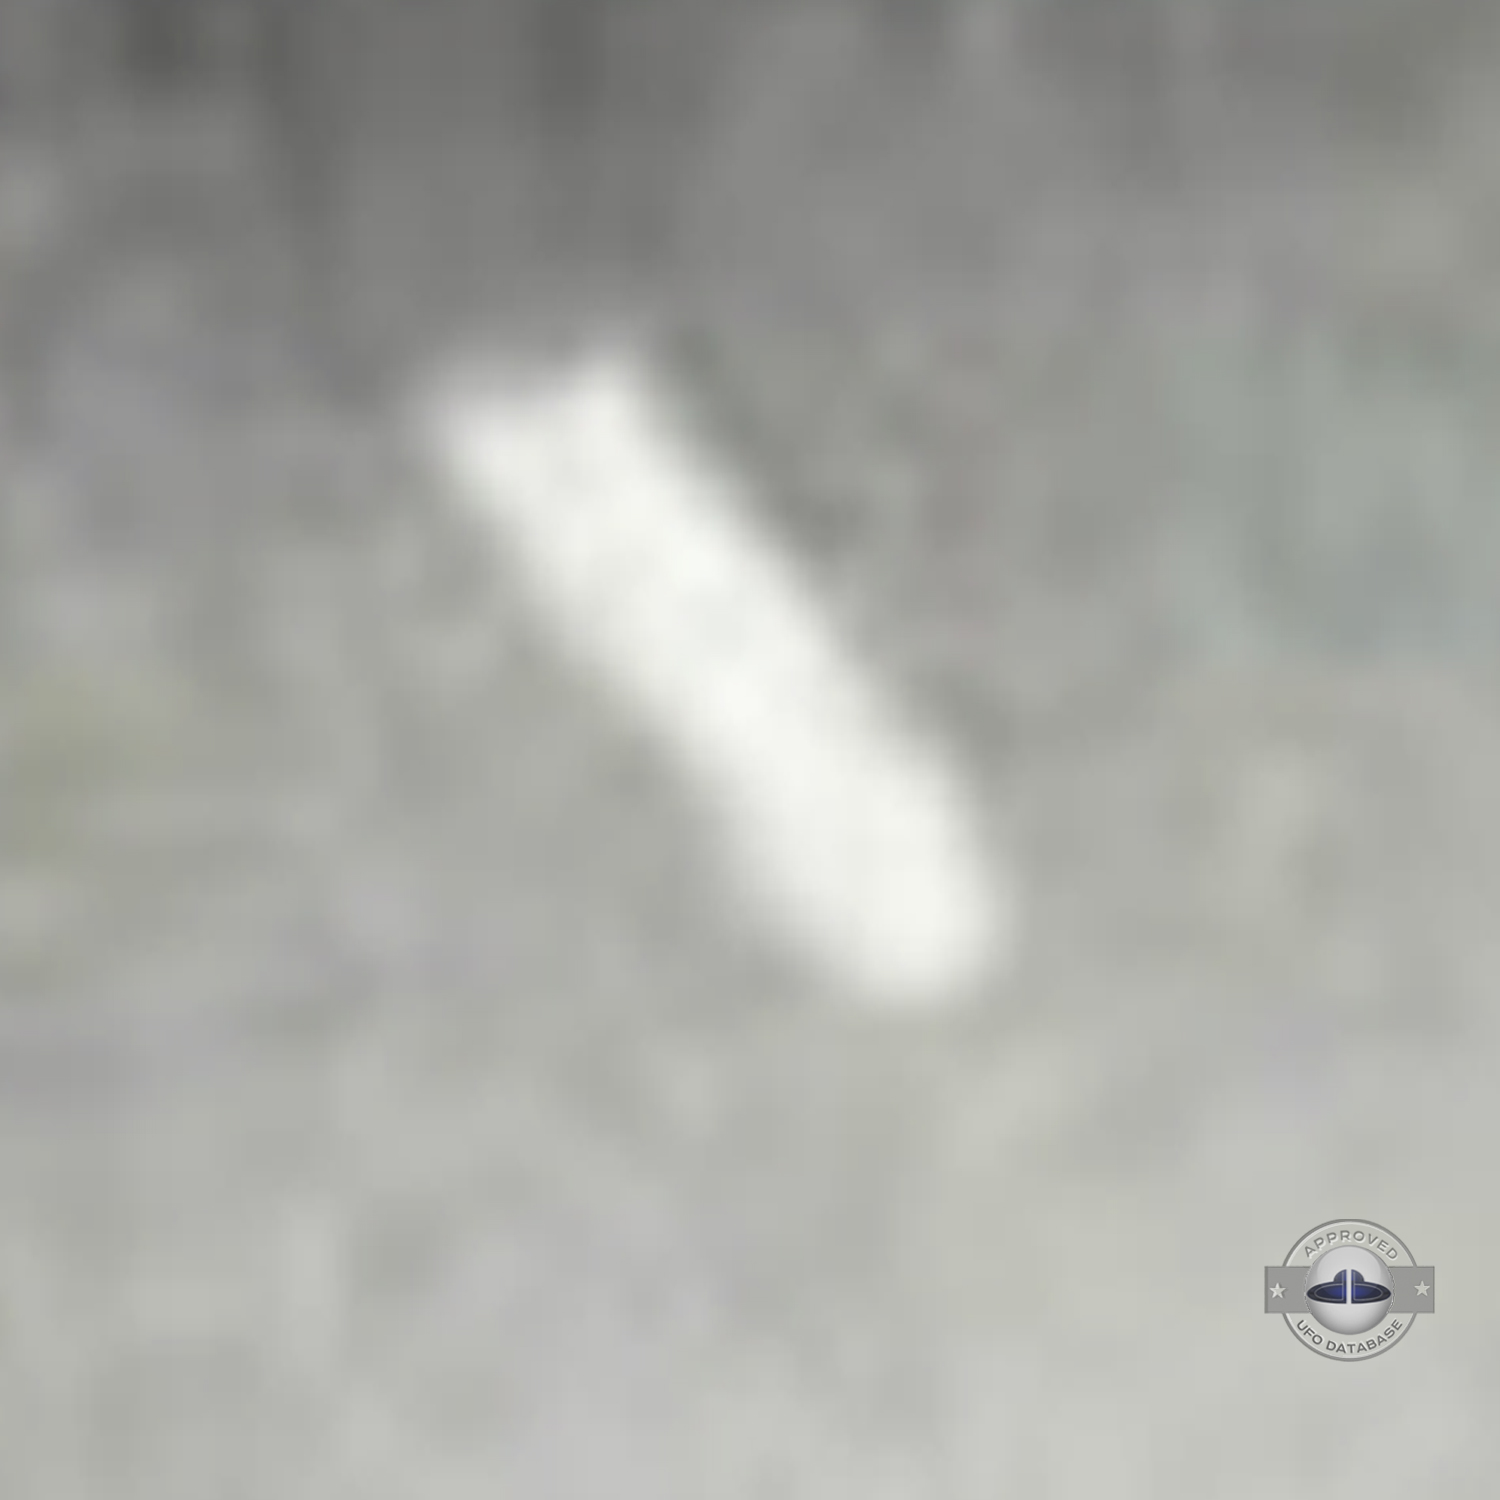 Tube shaped UFO - We can see the black hole at the end | New York UFO Picture #114-7